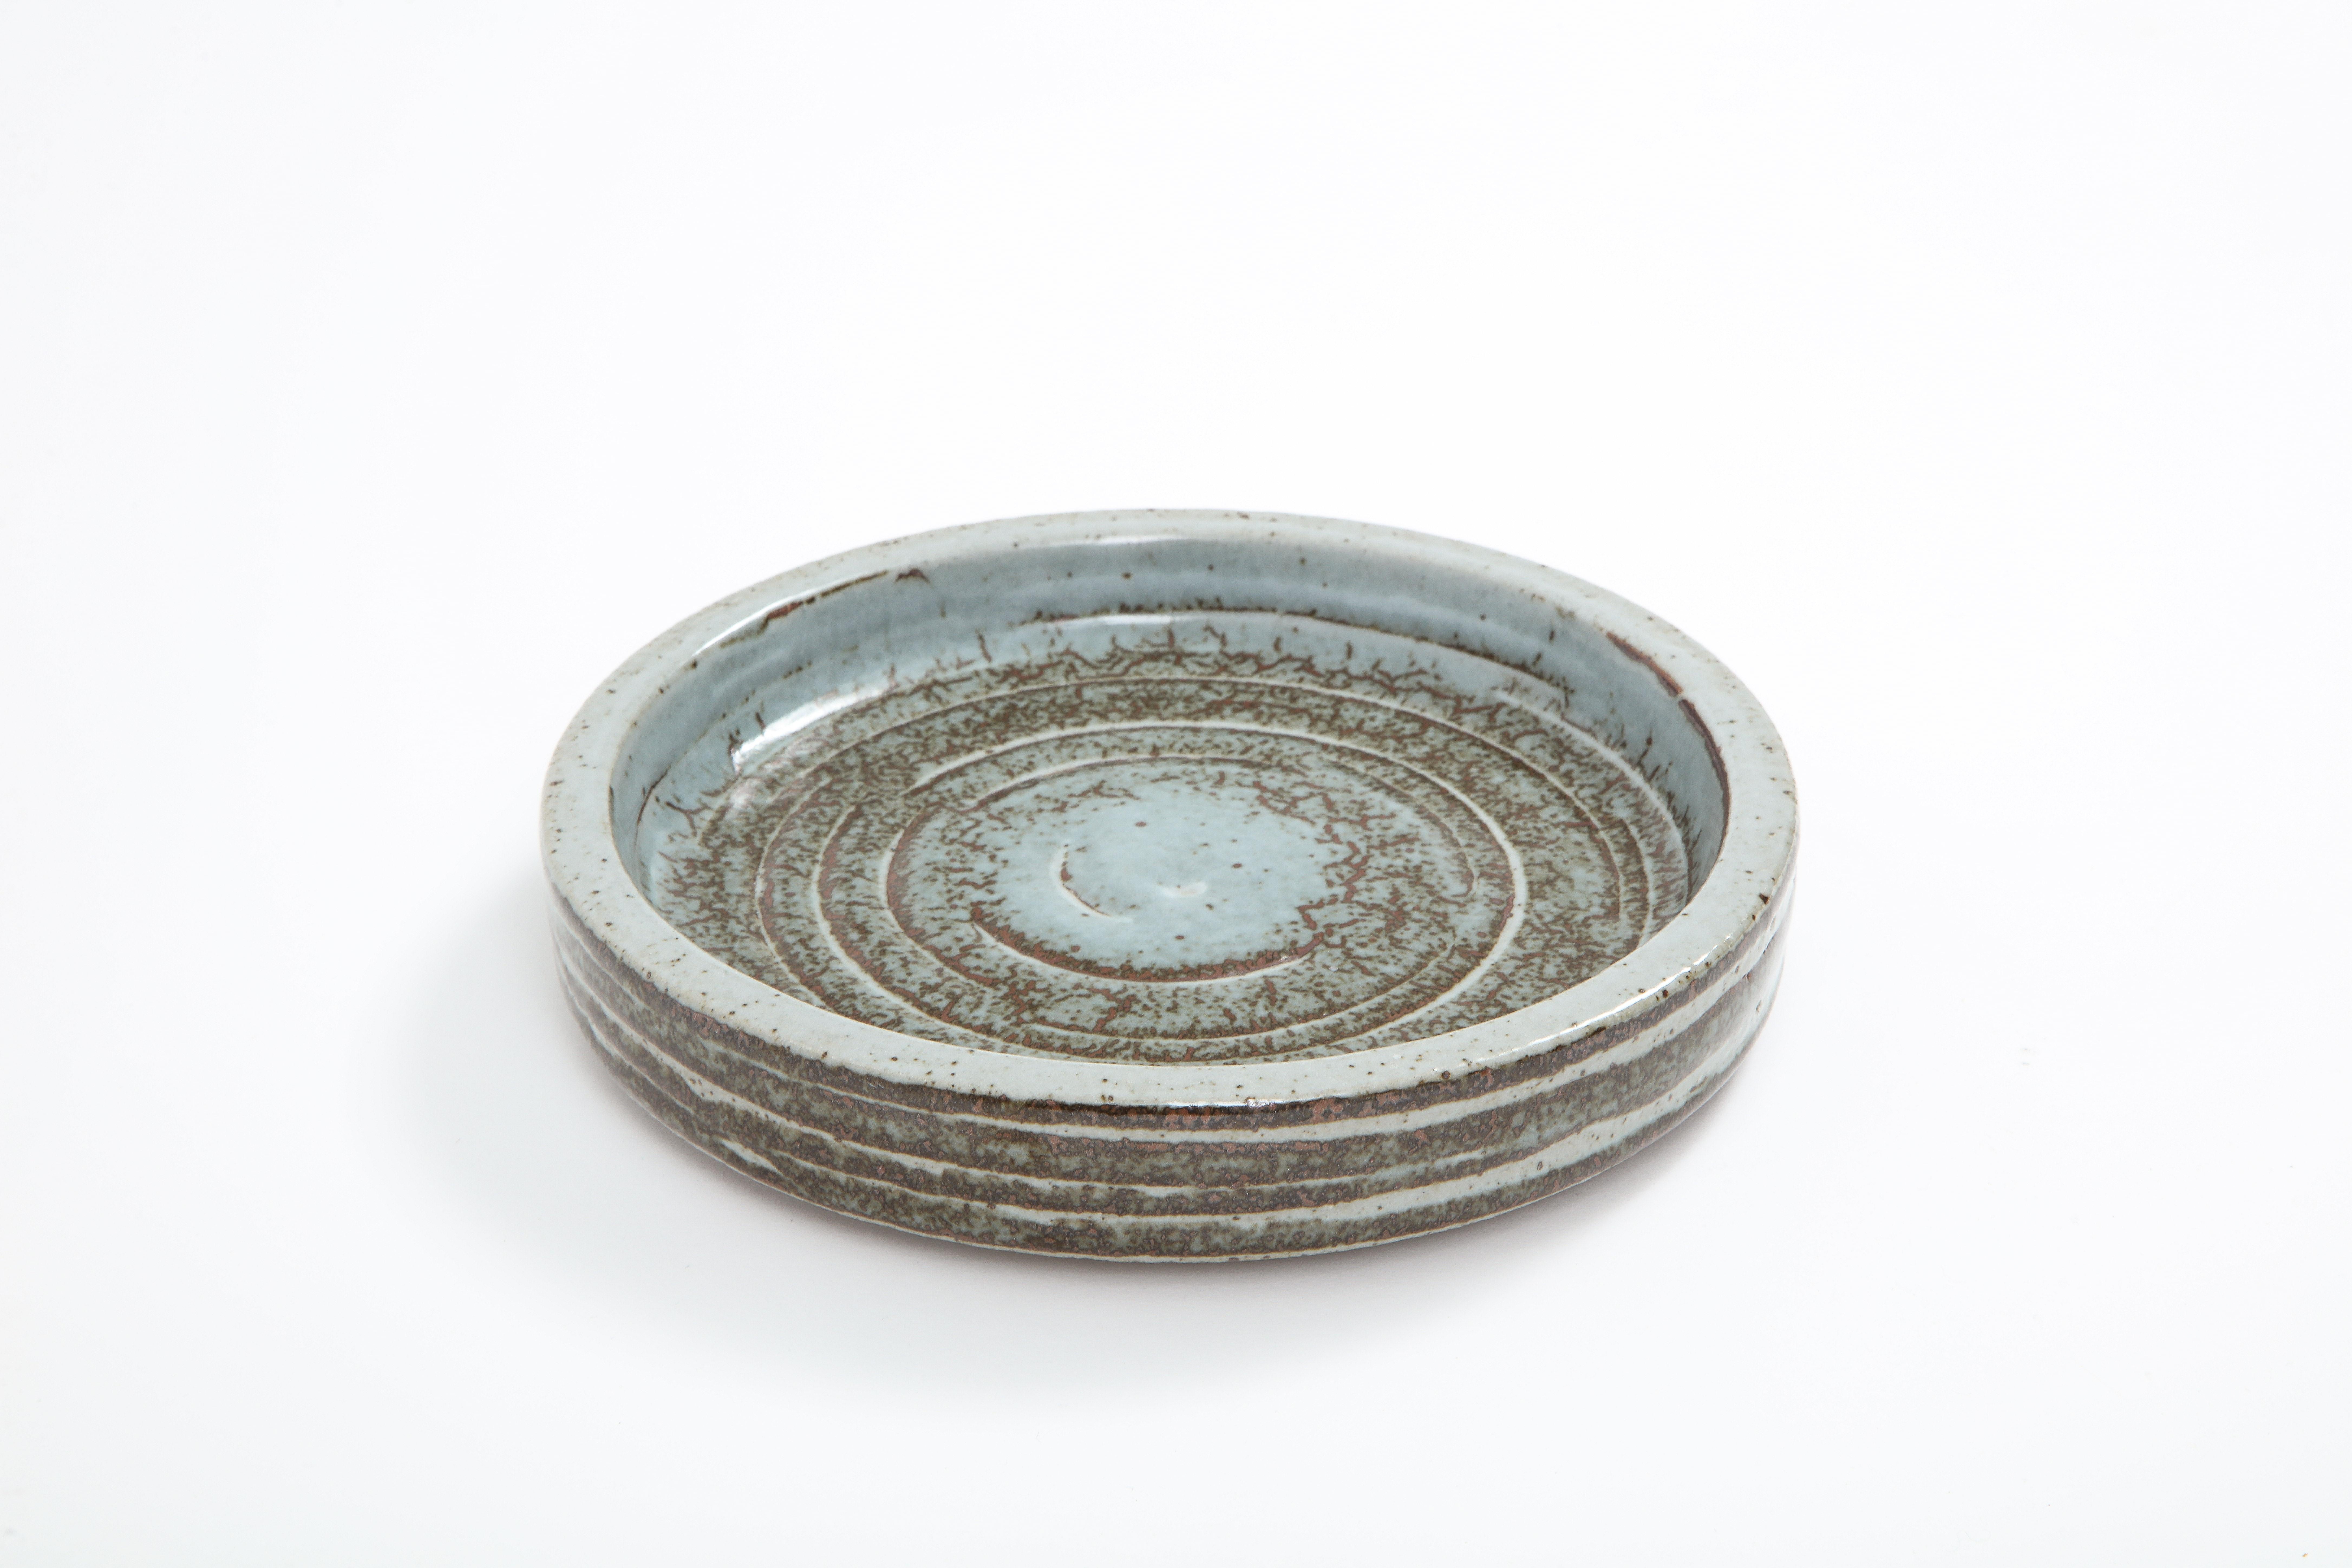 Lovely shallow dish by Per and Annelise Linnemann Schmidt (Palshus). Their studio was established in 1947 under the name of Palshus in Sengeløse, Denmark. They created simple, undecorated pottery including hand-thrown vases, bowls, ashtrays, lamp